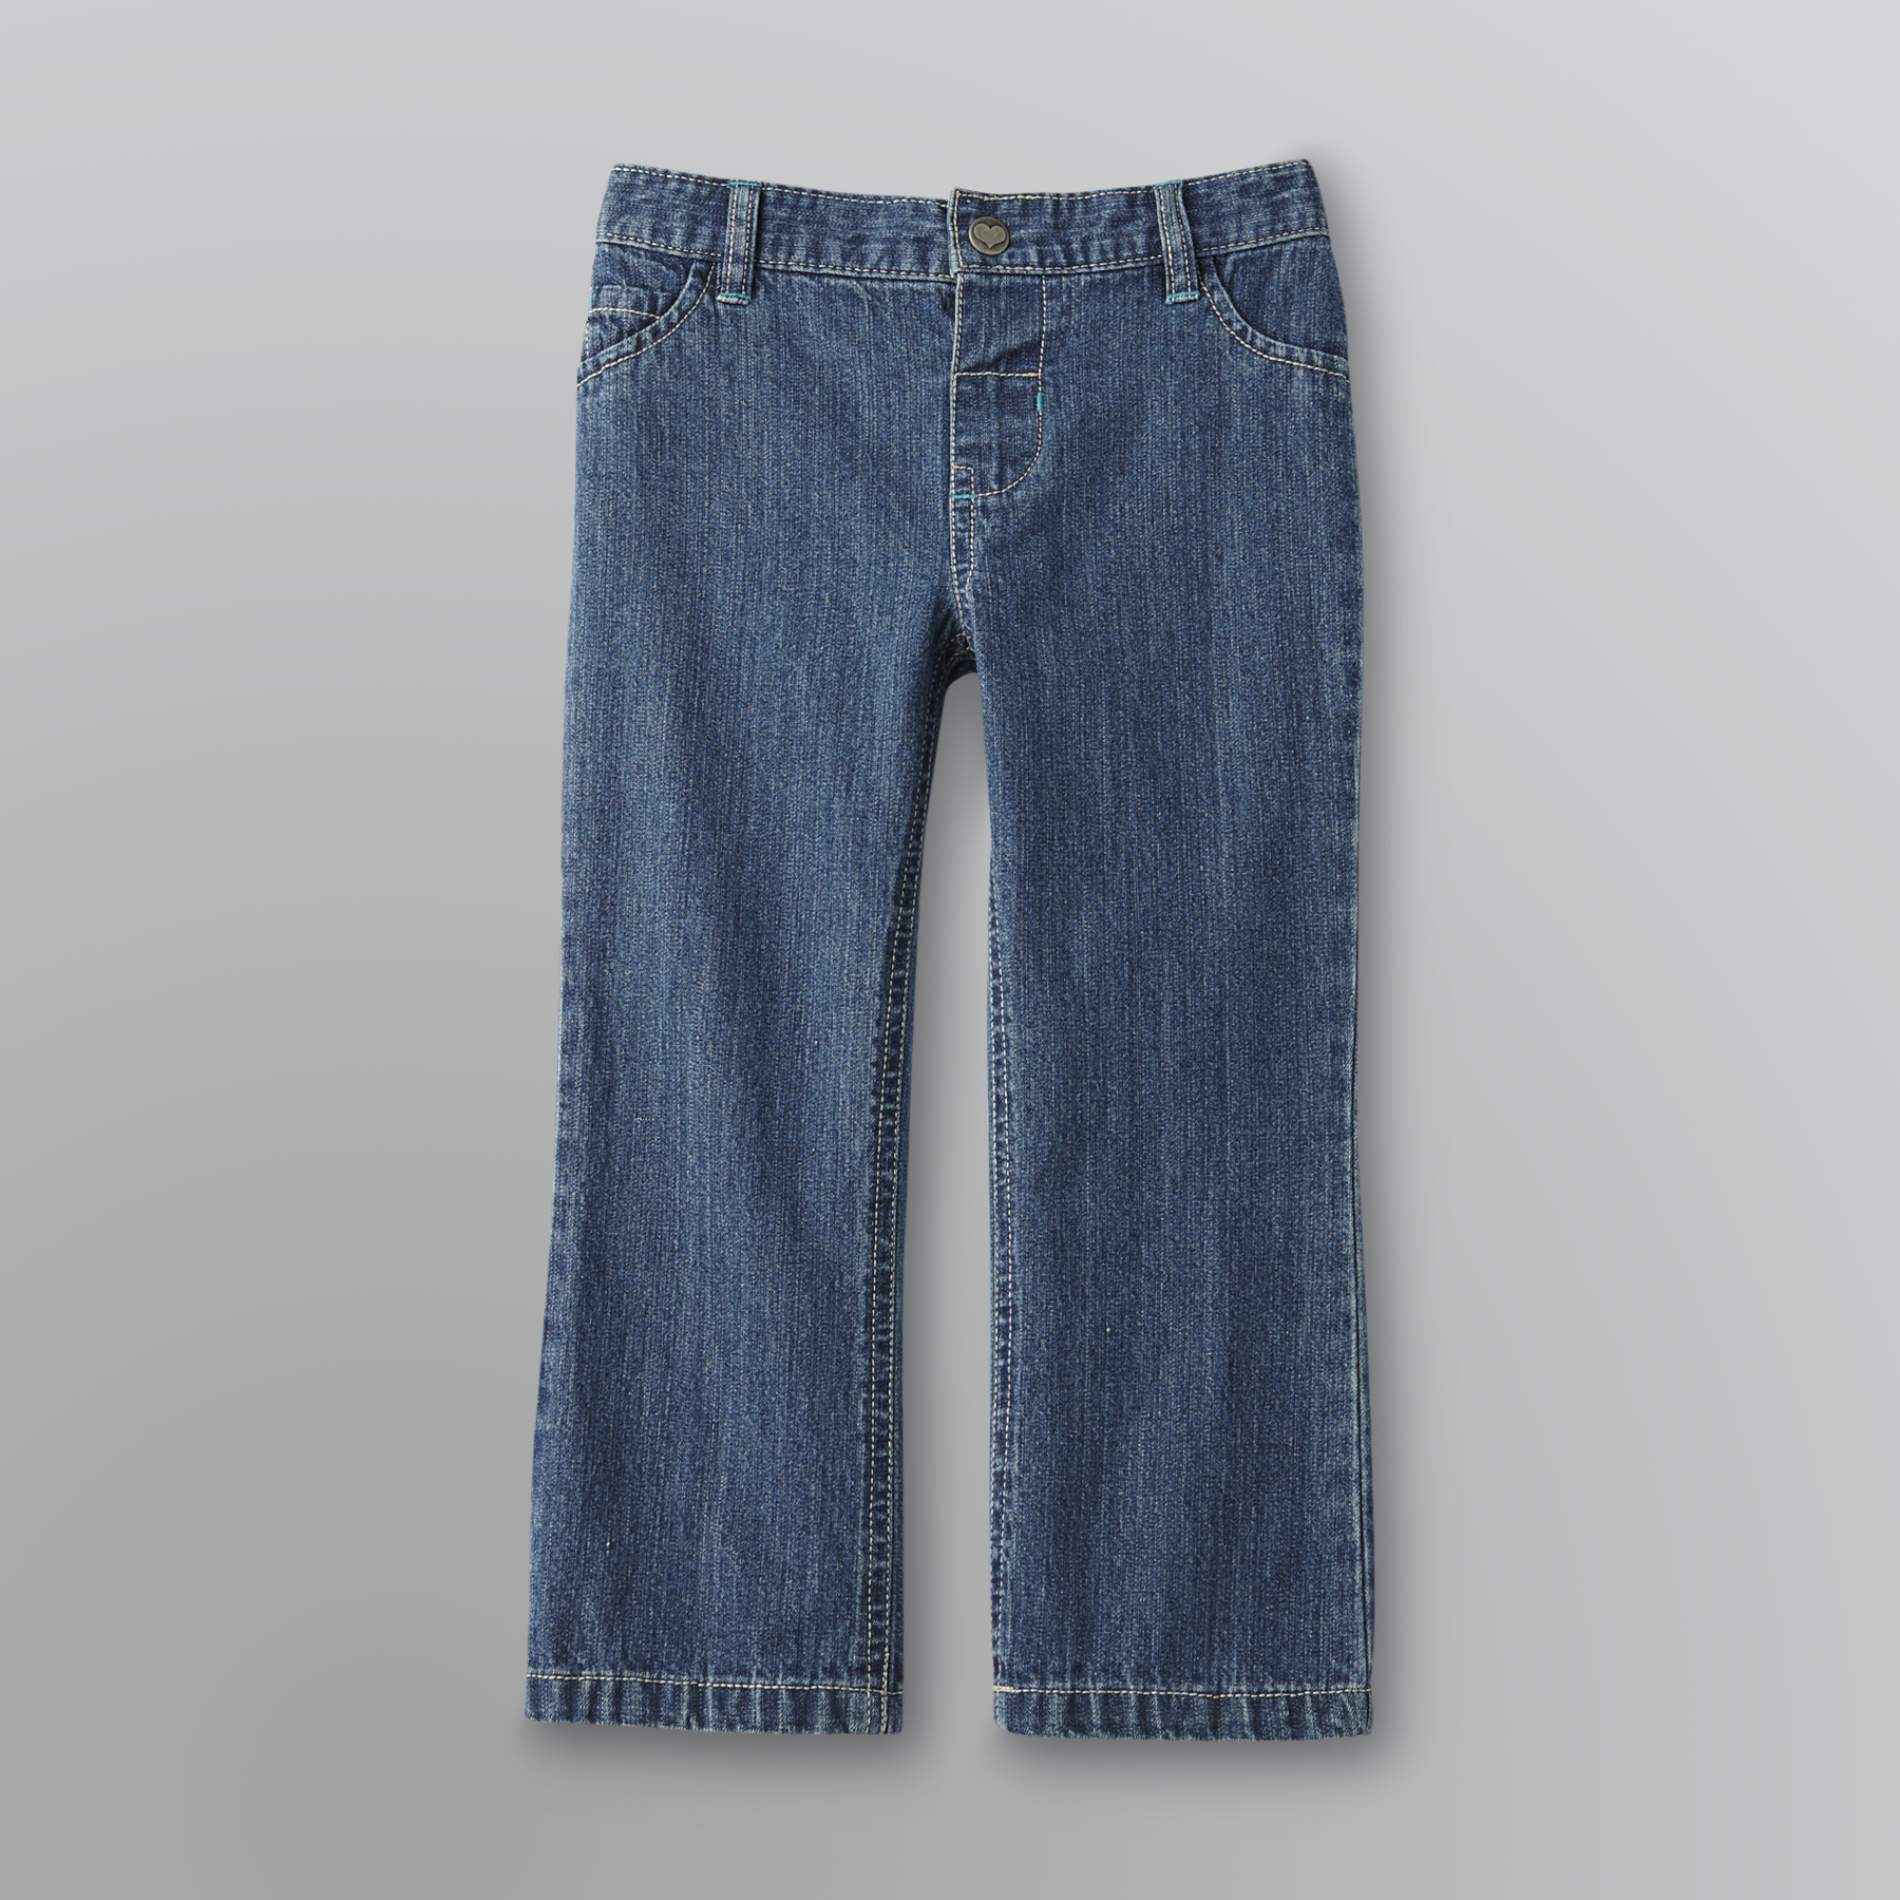 WonderKids Infant and Toddler Boy's Bootcut Jeans